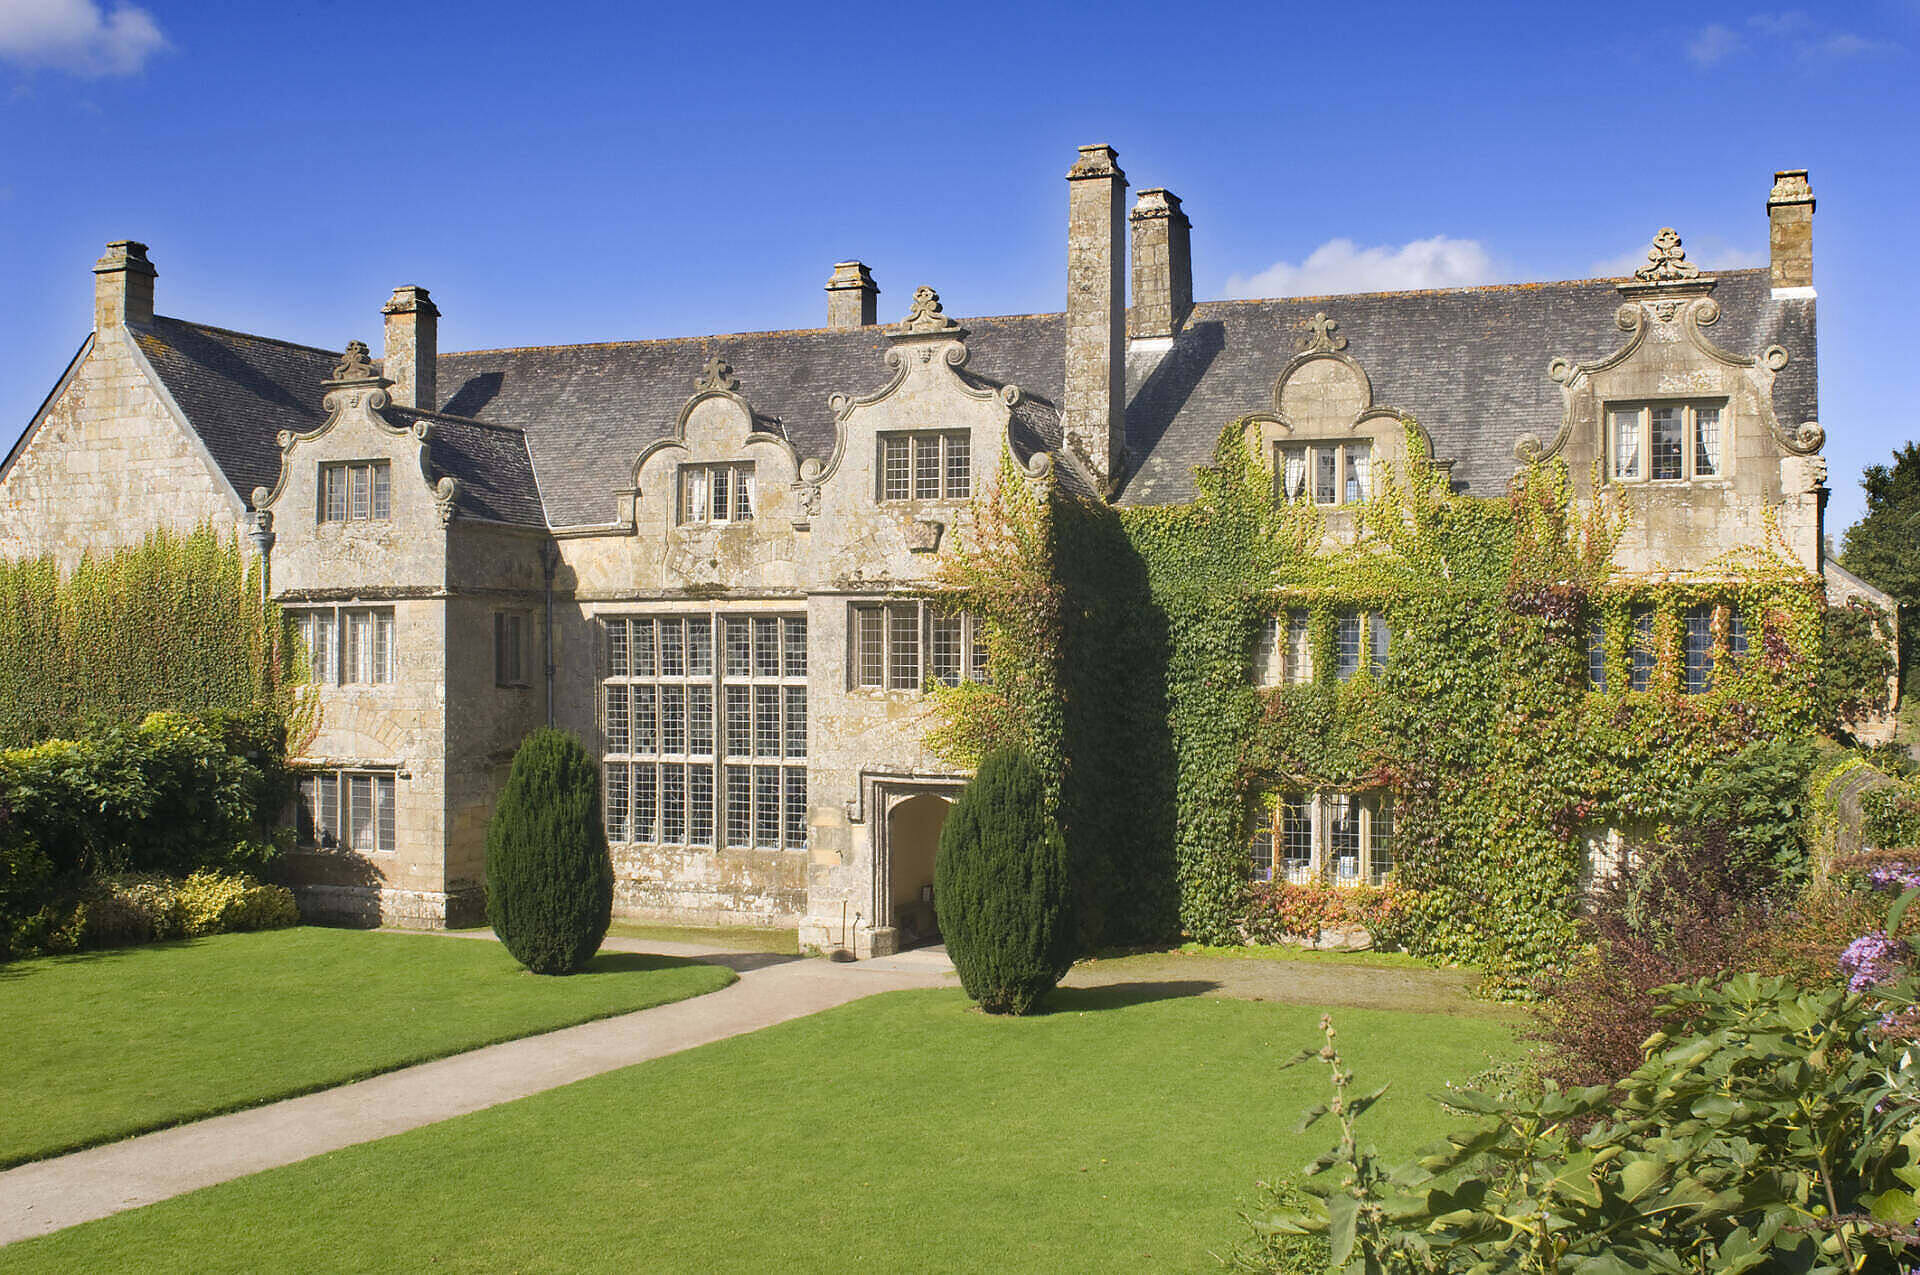 Majestic stone manor house with ornate windows, ivy-covered walls, and well-manicured gardens in the English countryside